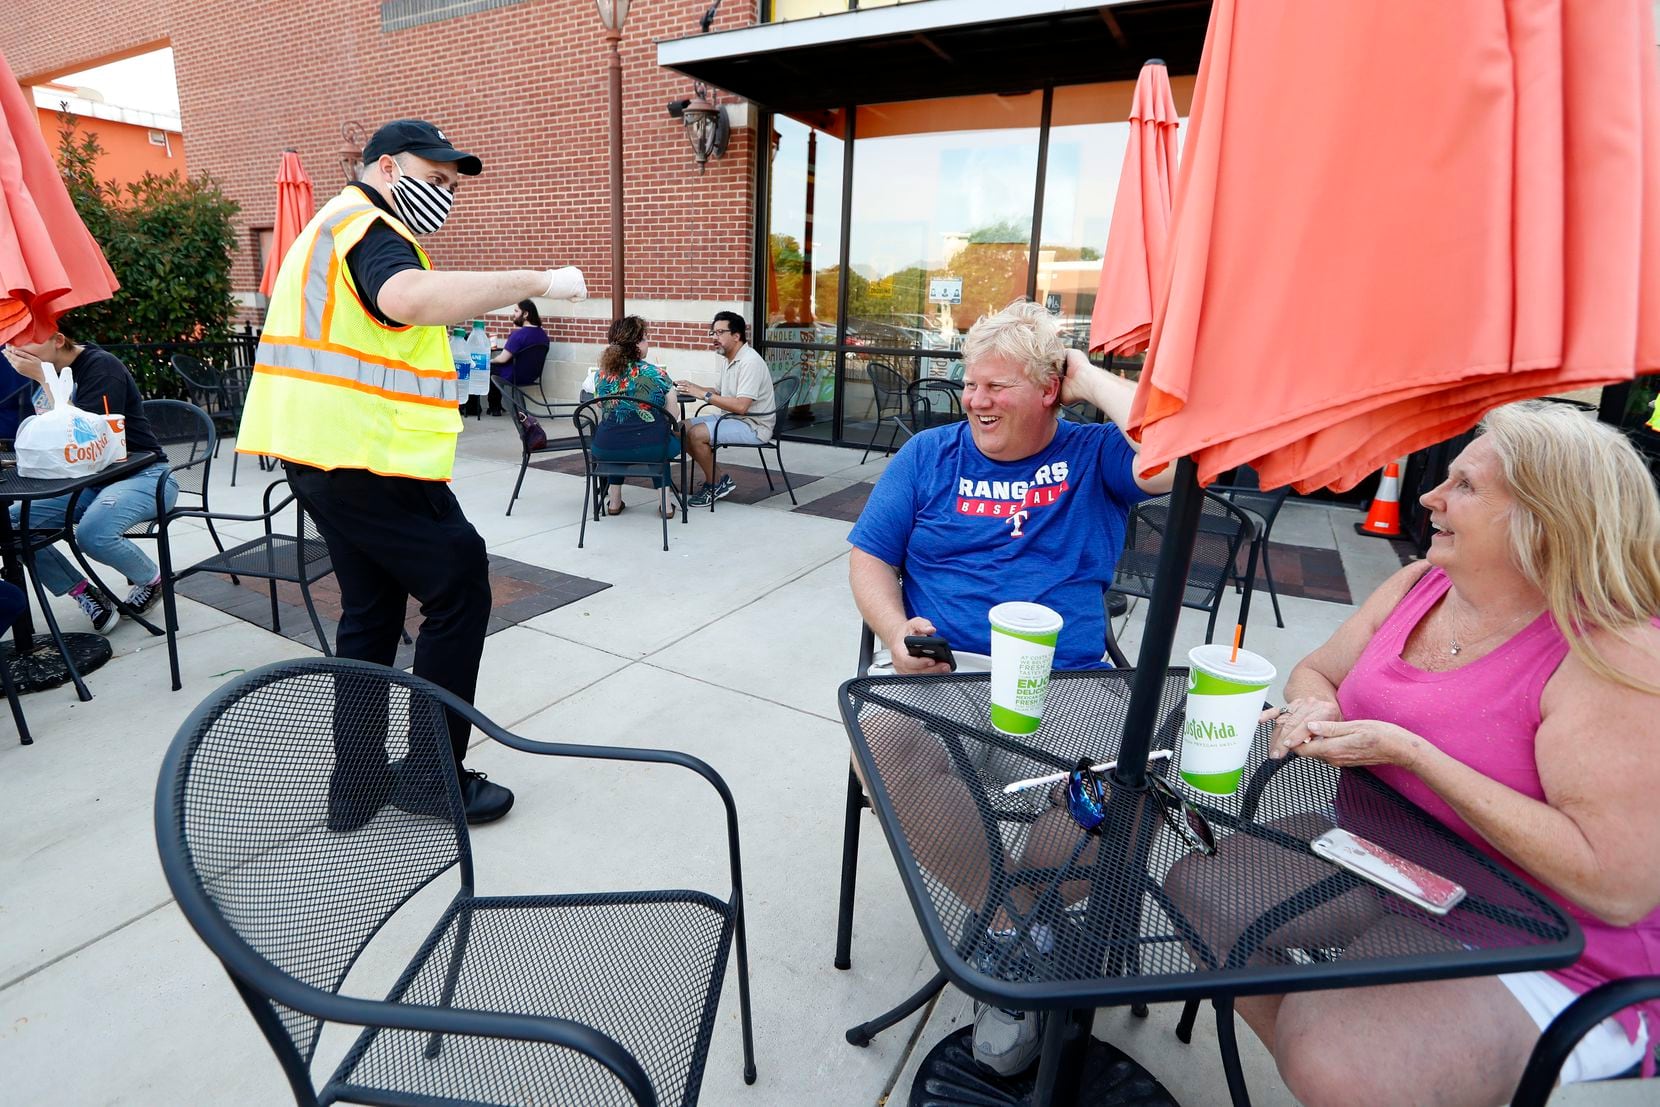 General manager Jay Norman, left, talks with Chad Steenwyk, center, and his wife Glenda, right, as the two dine outdoors on the patio at Costa Vida, a Mexican restaurant in Colleyville, Texas, Monday, April 27, 2020. The city of Colleyville relaxed rules in place due to COVID-19, allowing local restaurants to open up their patio to customers for dinning. (AP Photo/Tony Gutierrez)